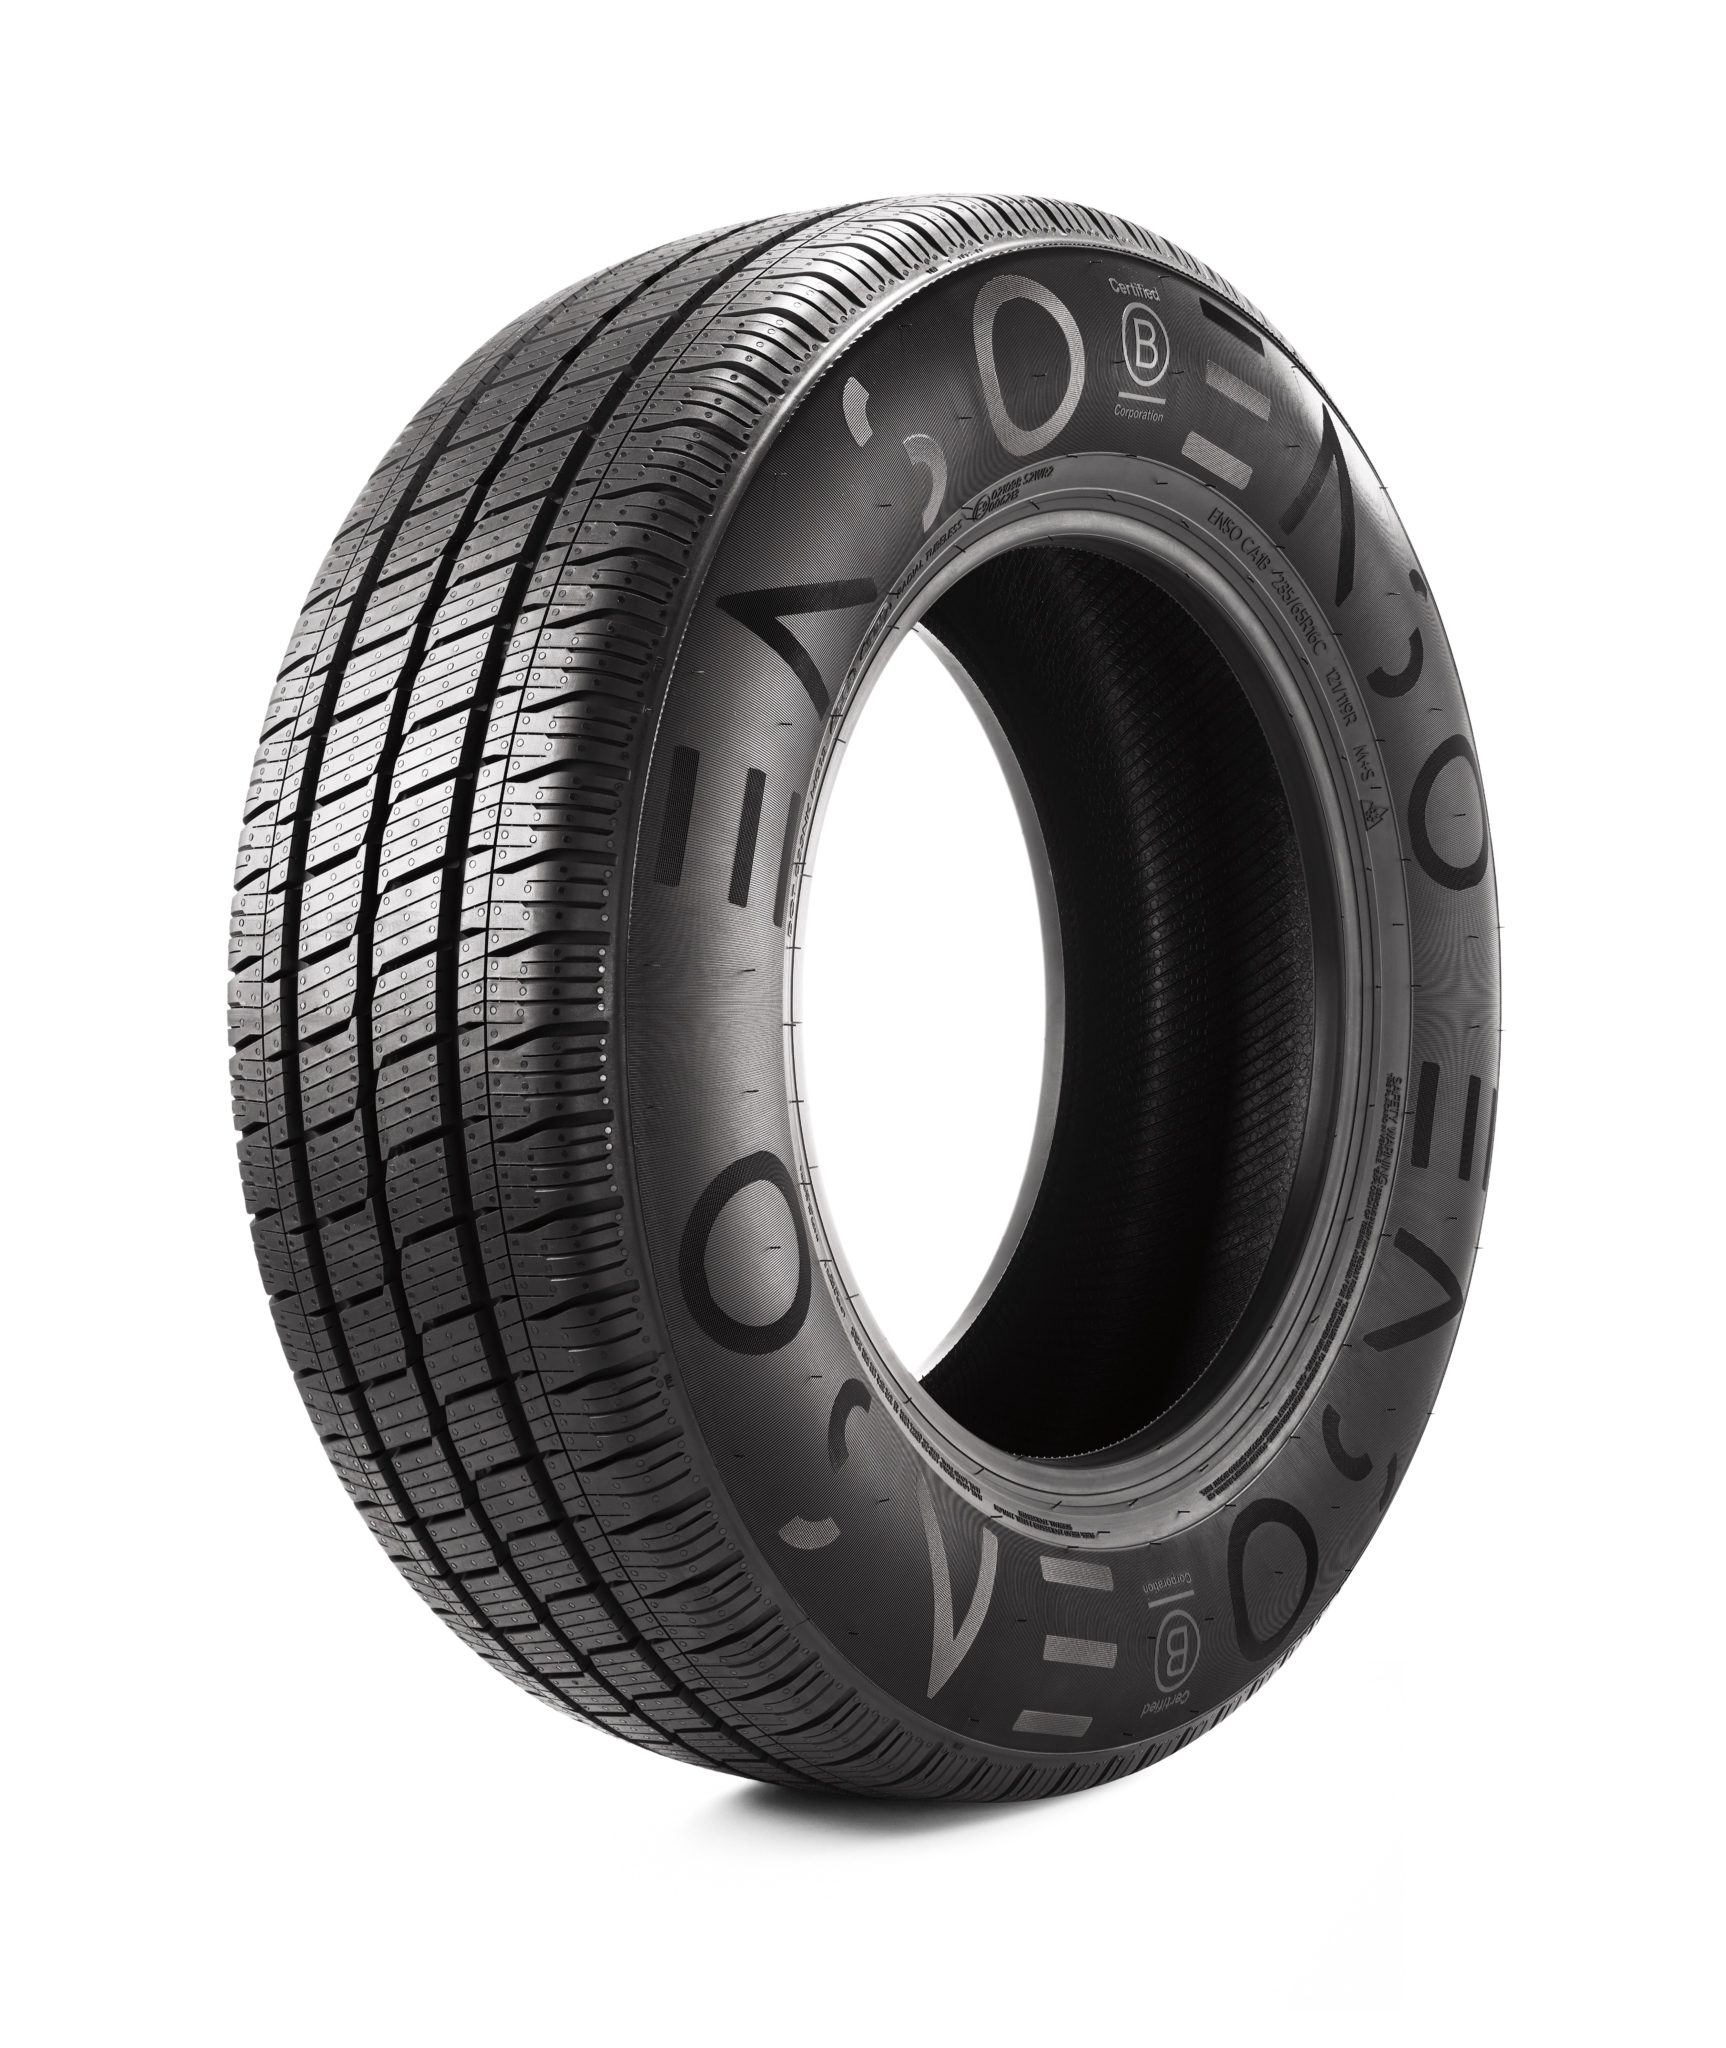 Enso’s new all-season electric van tyre made in Iris factory